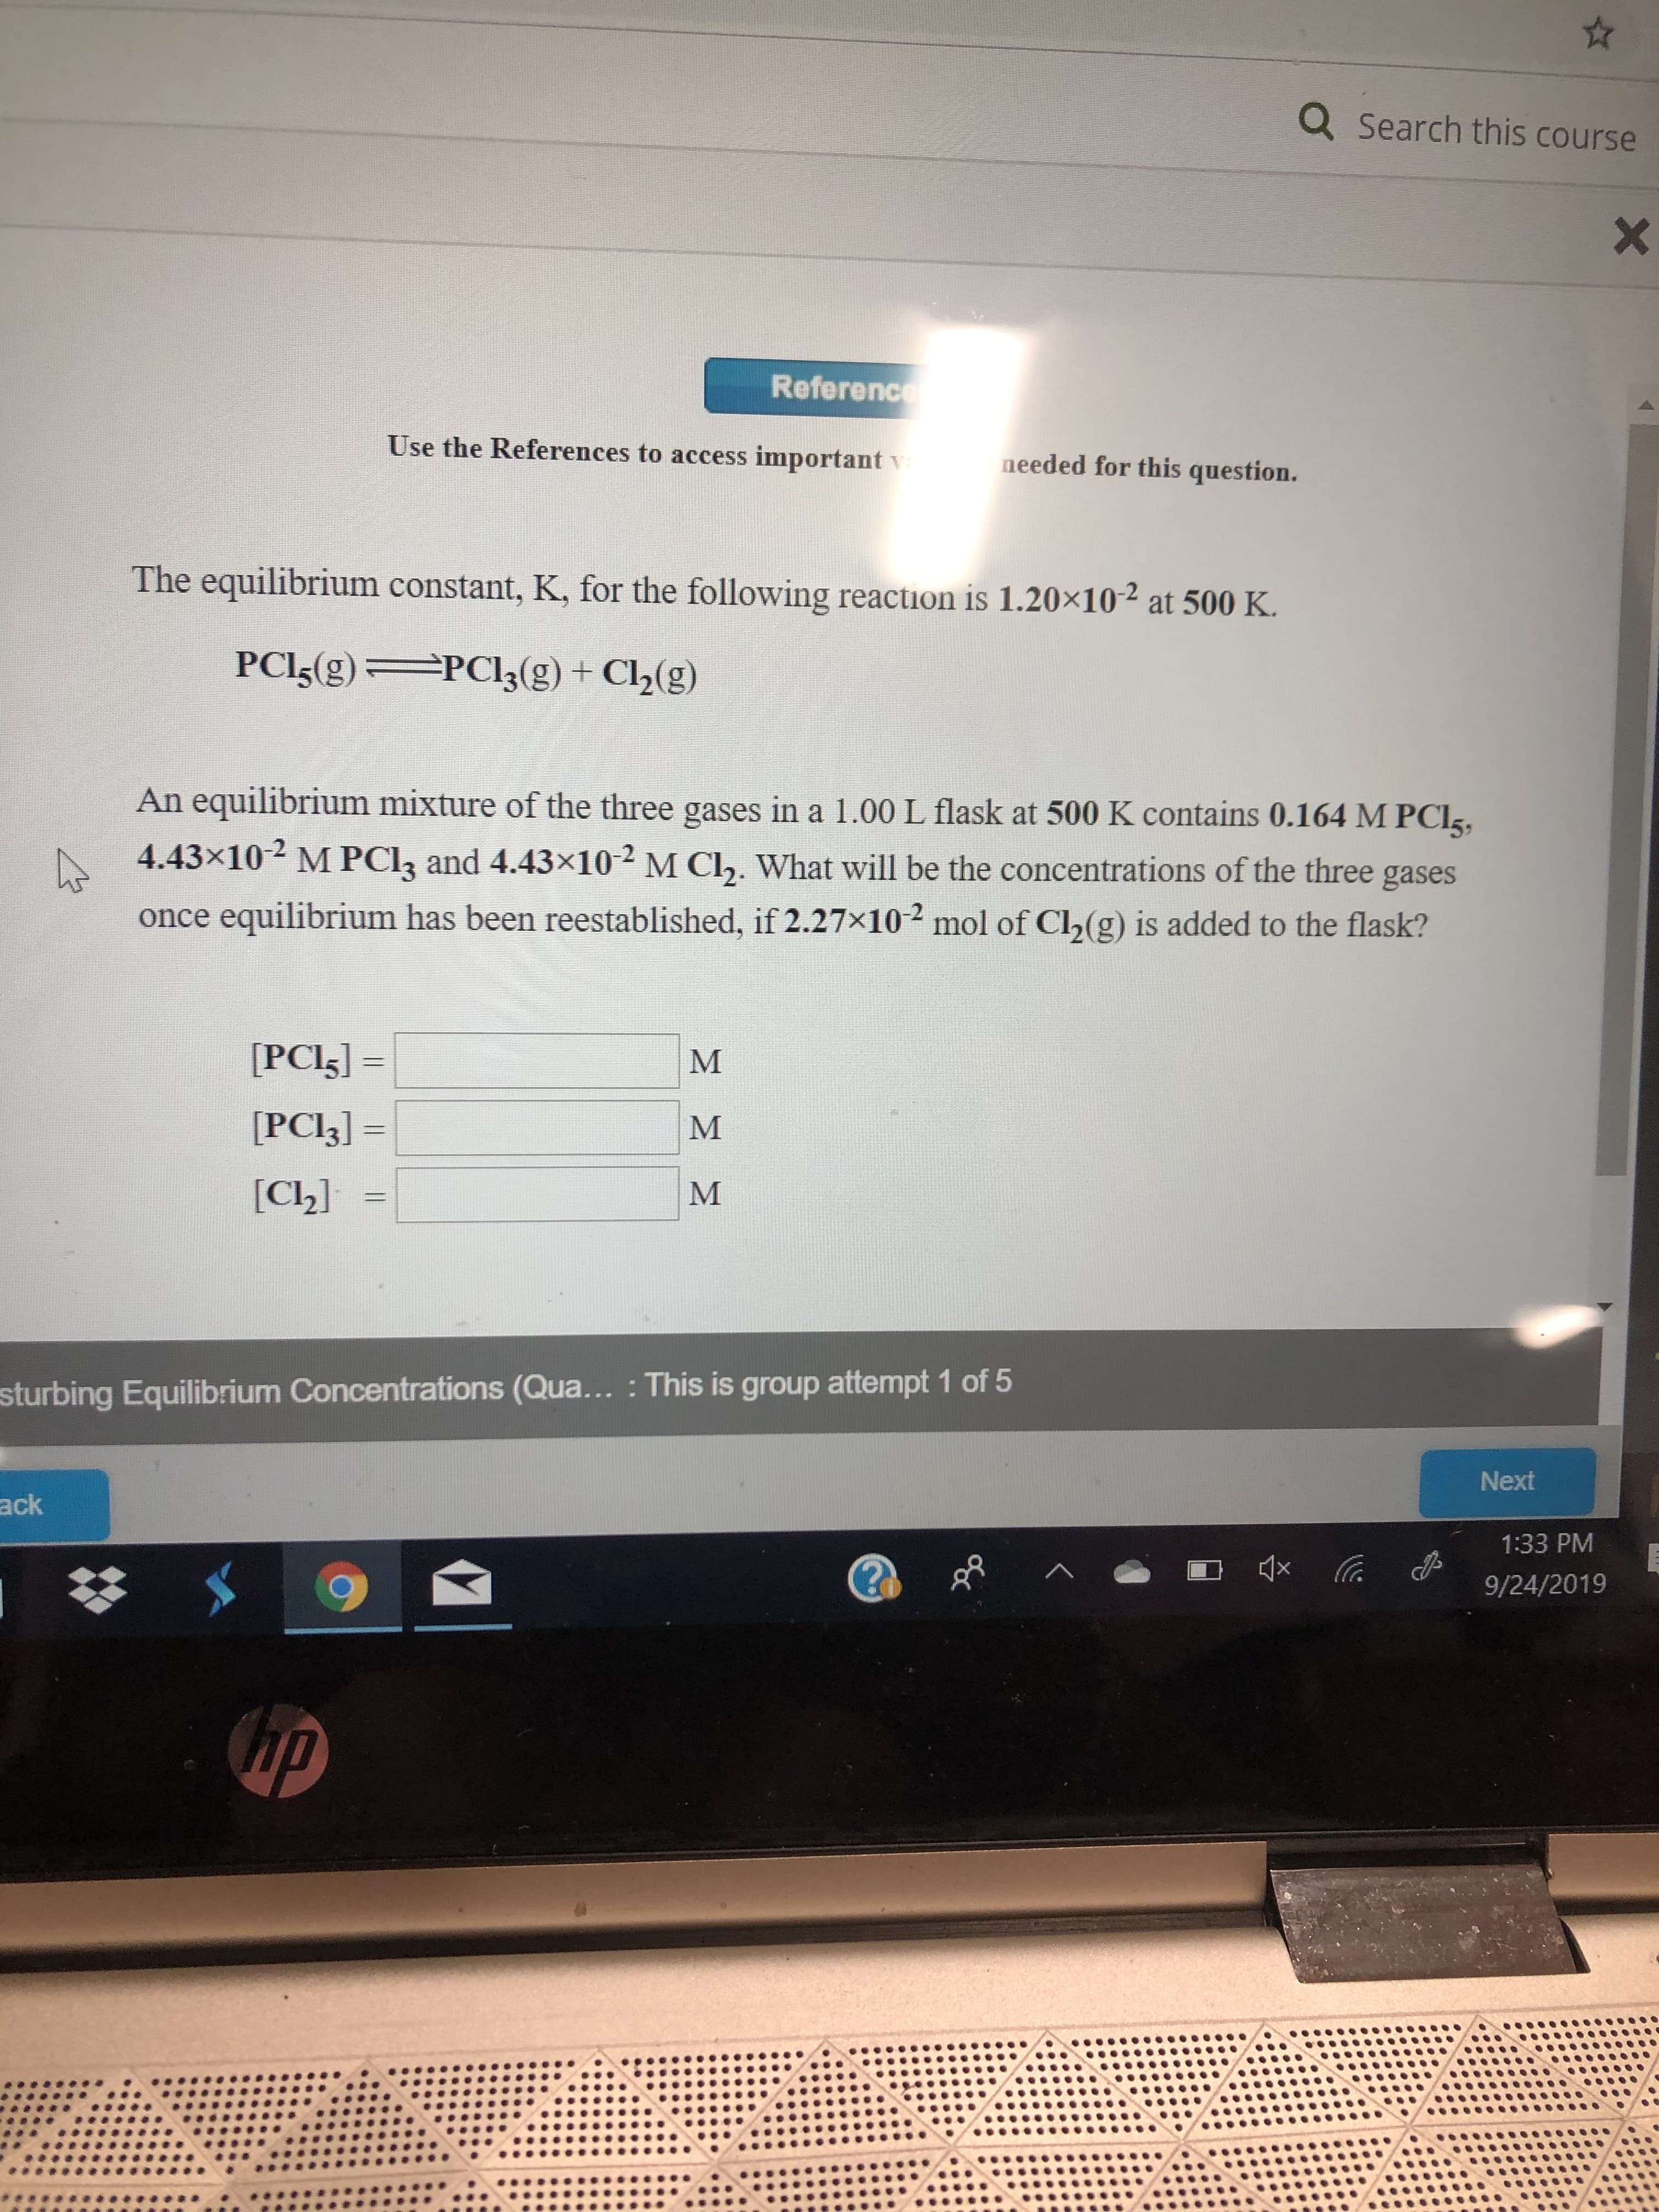 Q Search this course
Reference
Use the References to access importantv
needed for this question.
The equilibrium constant, K, for the following reaction is 1.20x102 at 500 K
PCI5(g)
PCl3(g) + Cl2(g)
An equilibrium mixture of the three gases in a 1.00 L flask at 500 K contains 0.164 M PCI
4.43x10 M PCI3 and 4.43x10 M C2. What will be the concentrations of the three gases
equilibrium has been reestablished, if 2.27x10 mol of Ch(g) is added to the flask?
once
[PCI5]=
[PCI3]=
М
[Cl2]
sturbing Equilibrium Concentrations (Qua... : This is group attempt 1 of 5
Next
ack
1:33 PM
9/24/2019
up
Xx
